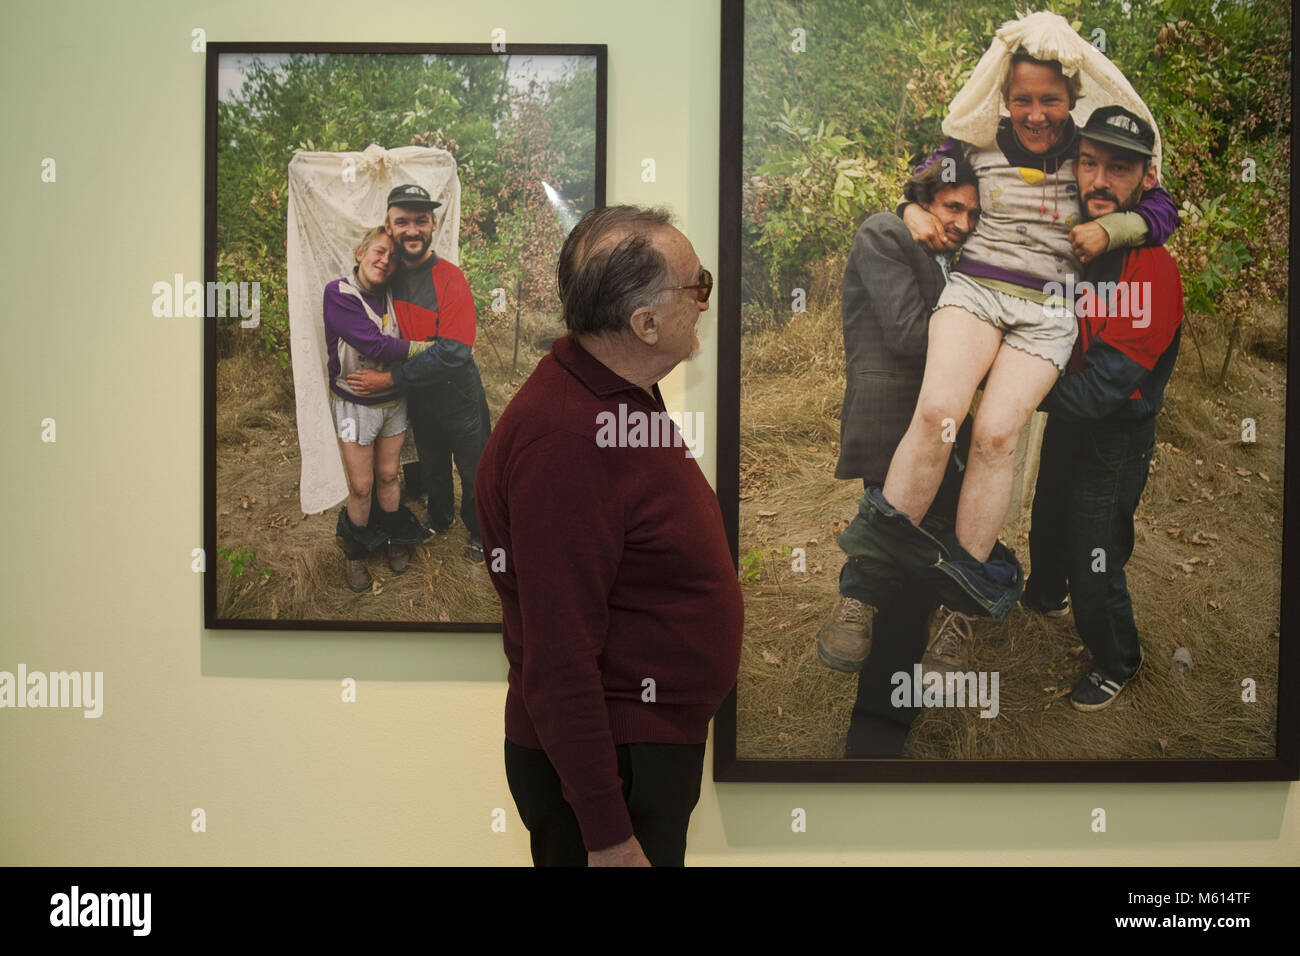 London, UK. 27th Feb, 2018. Photographer Boris Mikhailov at the exhibit.Another Kind of Life: Photography on the Margins.Touching on themes of countercultures, subcultures and minorities of all kinds, the show features the work of 20 photographers from the 1950s to the present day. From street photography to portraiture, vernacular albums to documentary reportage, the show includes the Casa Susanna Collection, Paz Errazuriz, Pieter Hugo, Mary Ellen Mark, Dayanita Singh, Igor Palmin, Boris Mikhailov, Philippe Chancel, Larry Clark, Bruce Davidson, Jim Goldberg, Katy Grannan, Danny Lyon, Sei Stock Photo